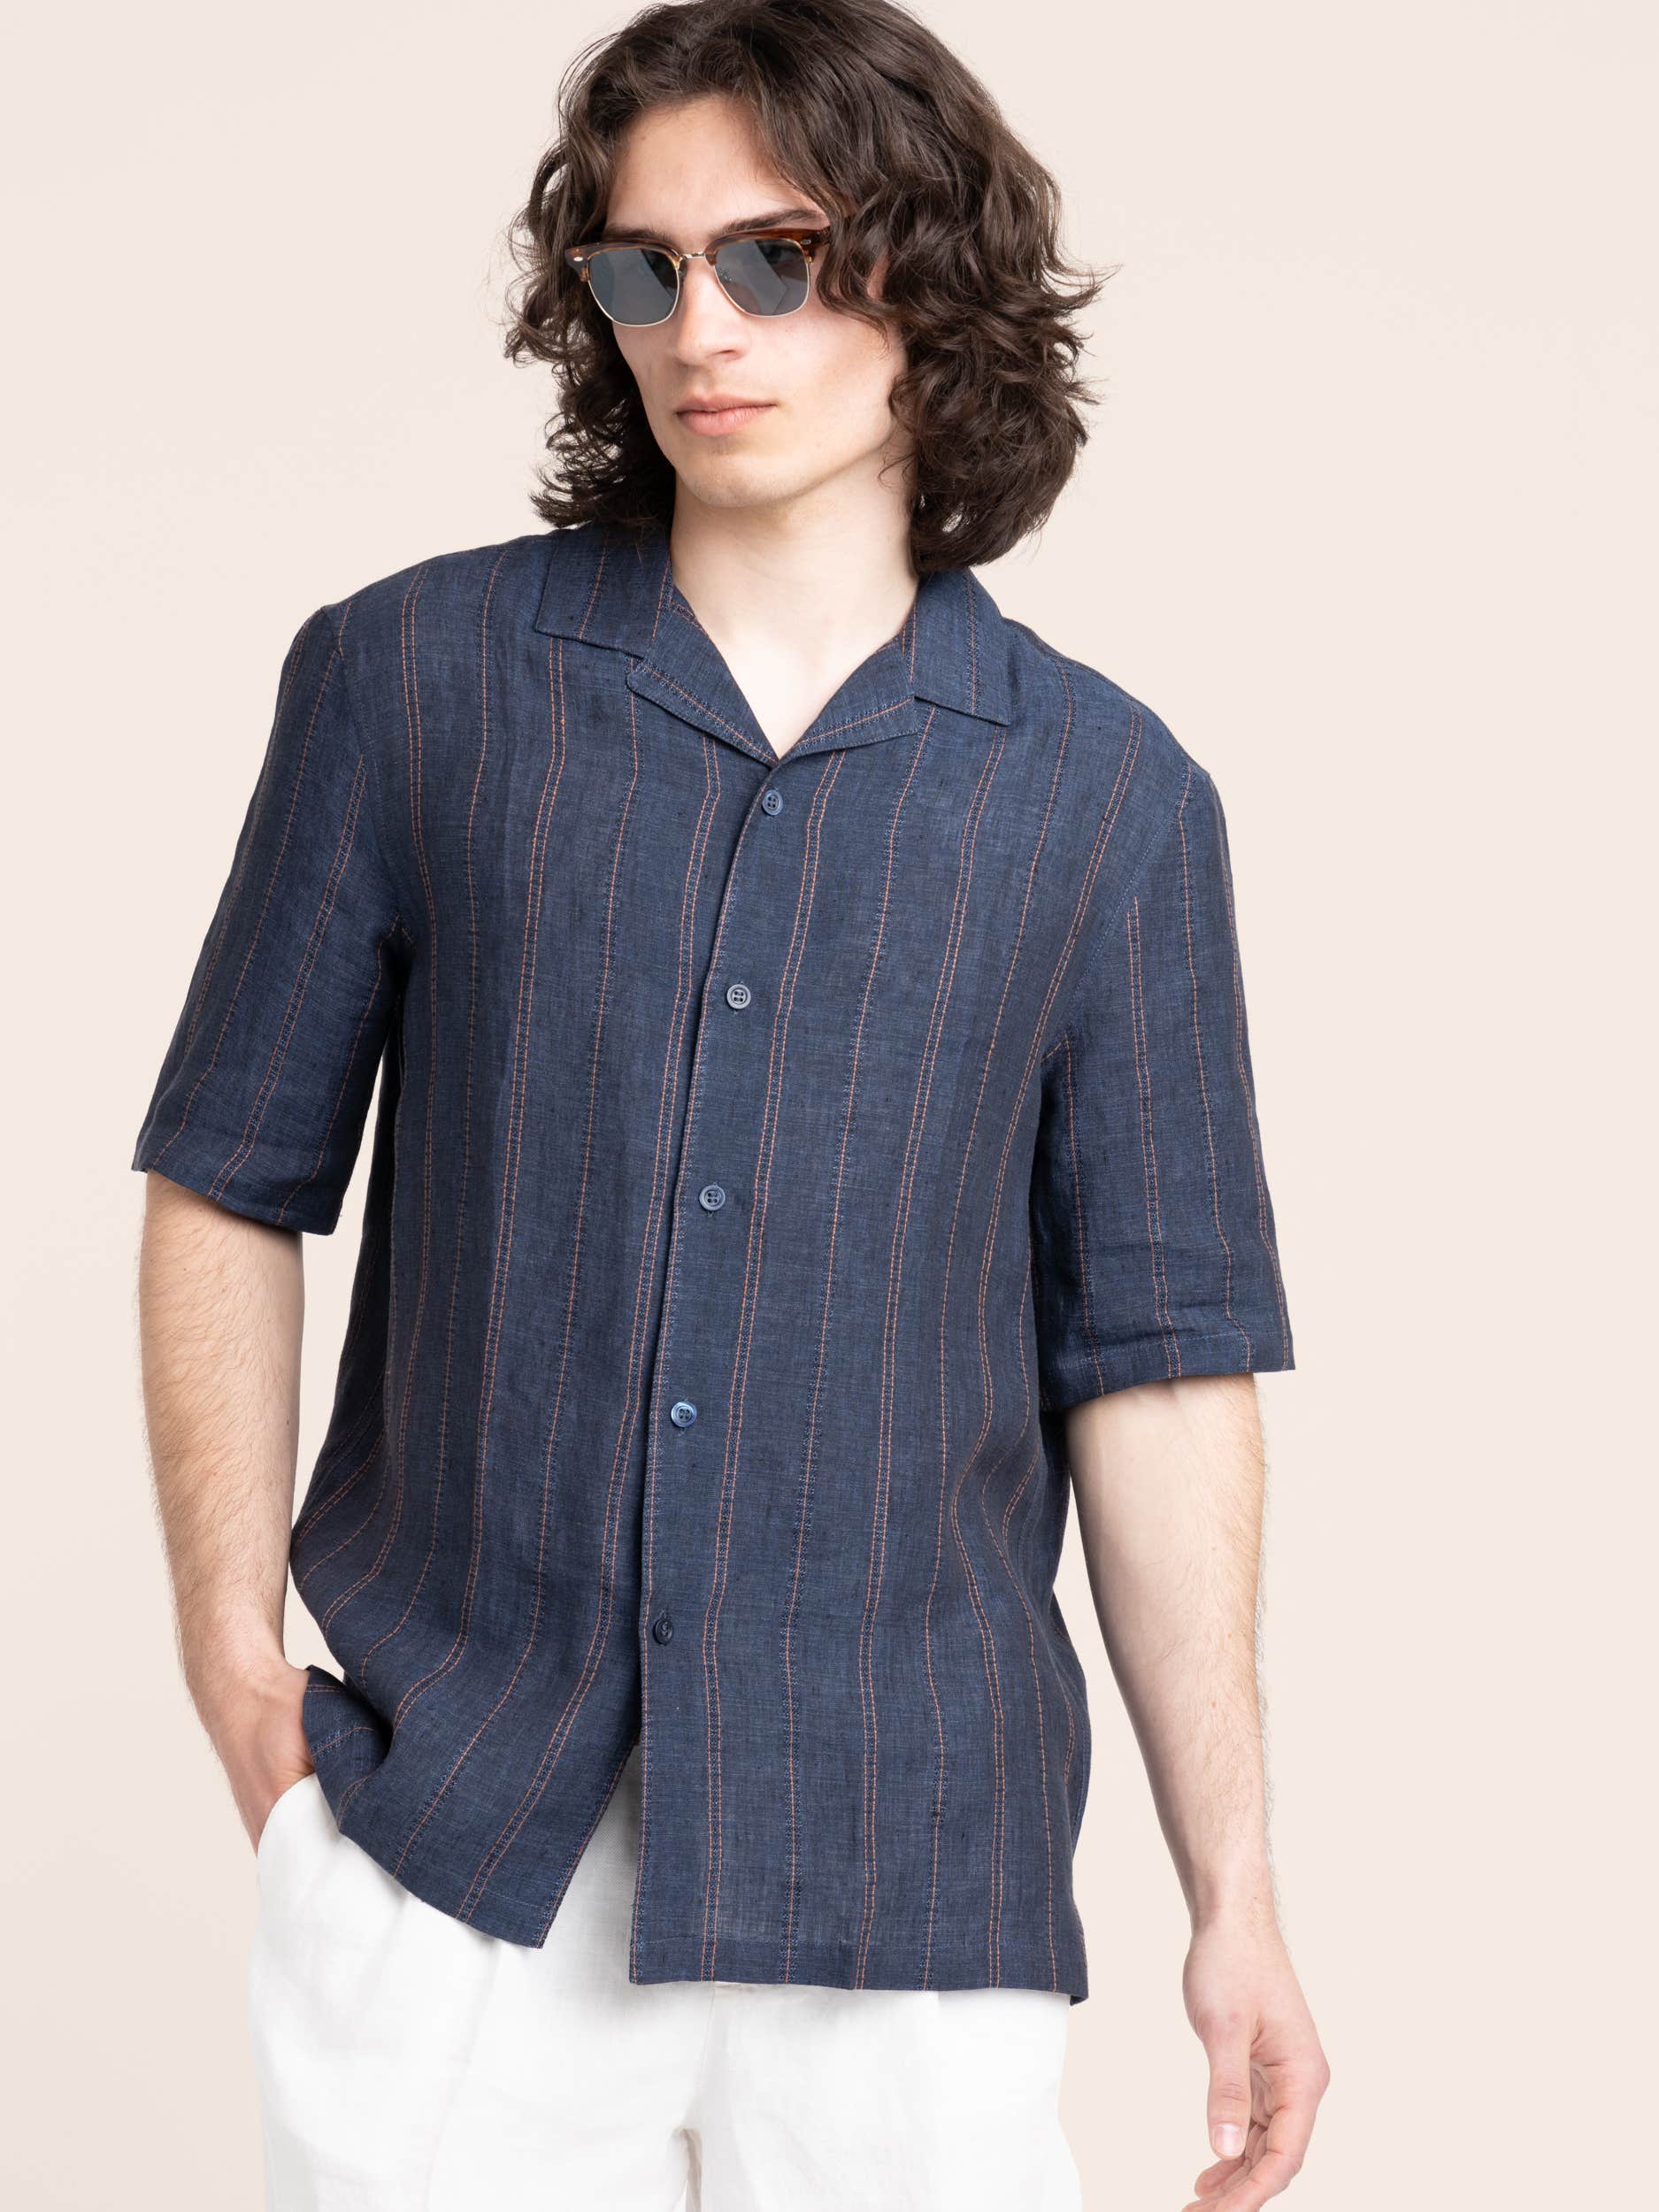 Navy Embroidered Striped Linen Shirt